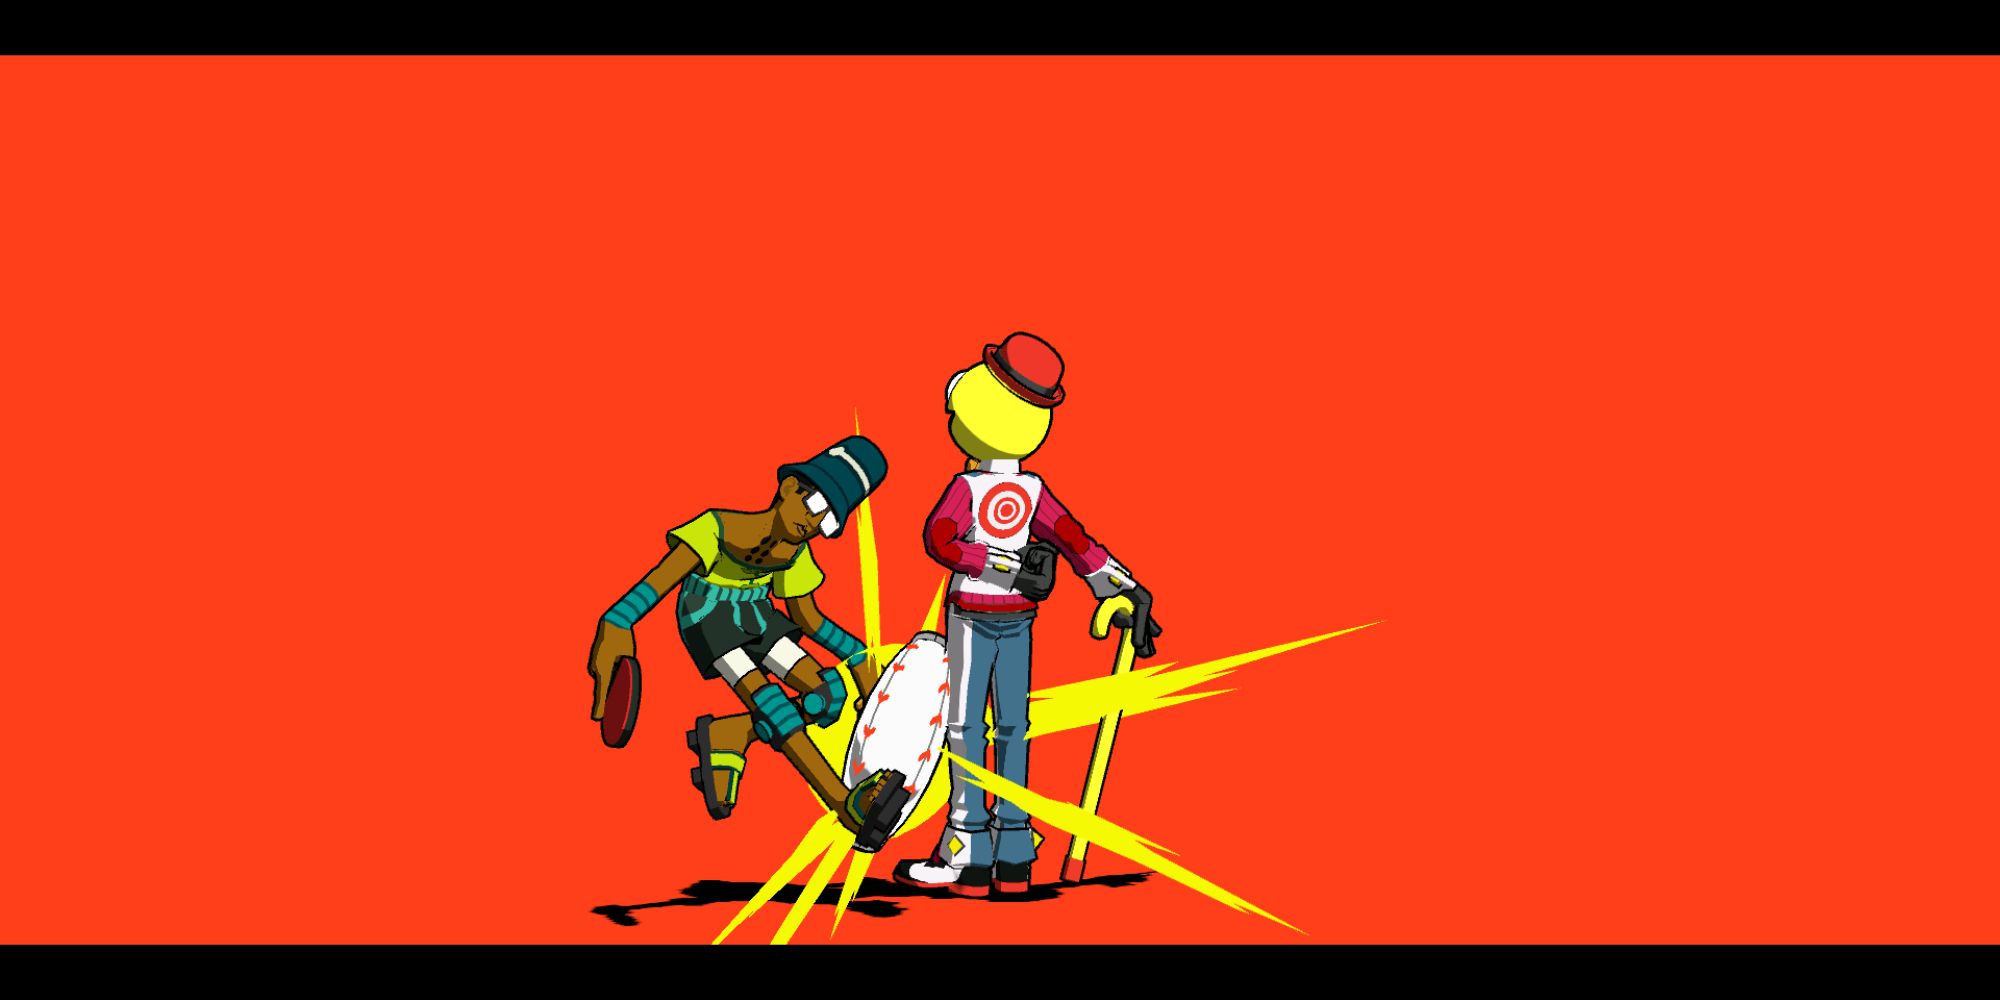 Lethal League Blaze a wide shot of the characters Dice and Candyman against a pastel red background with Dice being hit by a baseball 